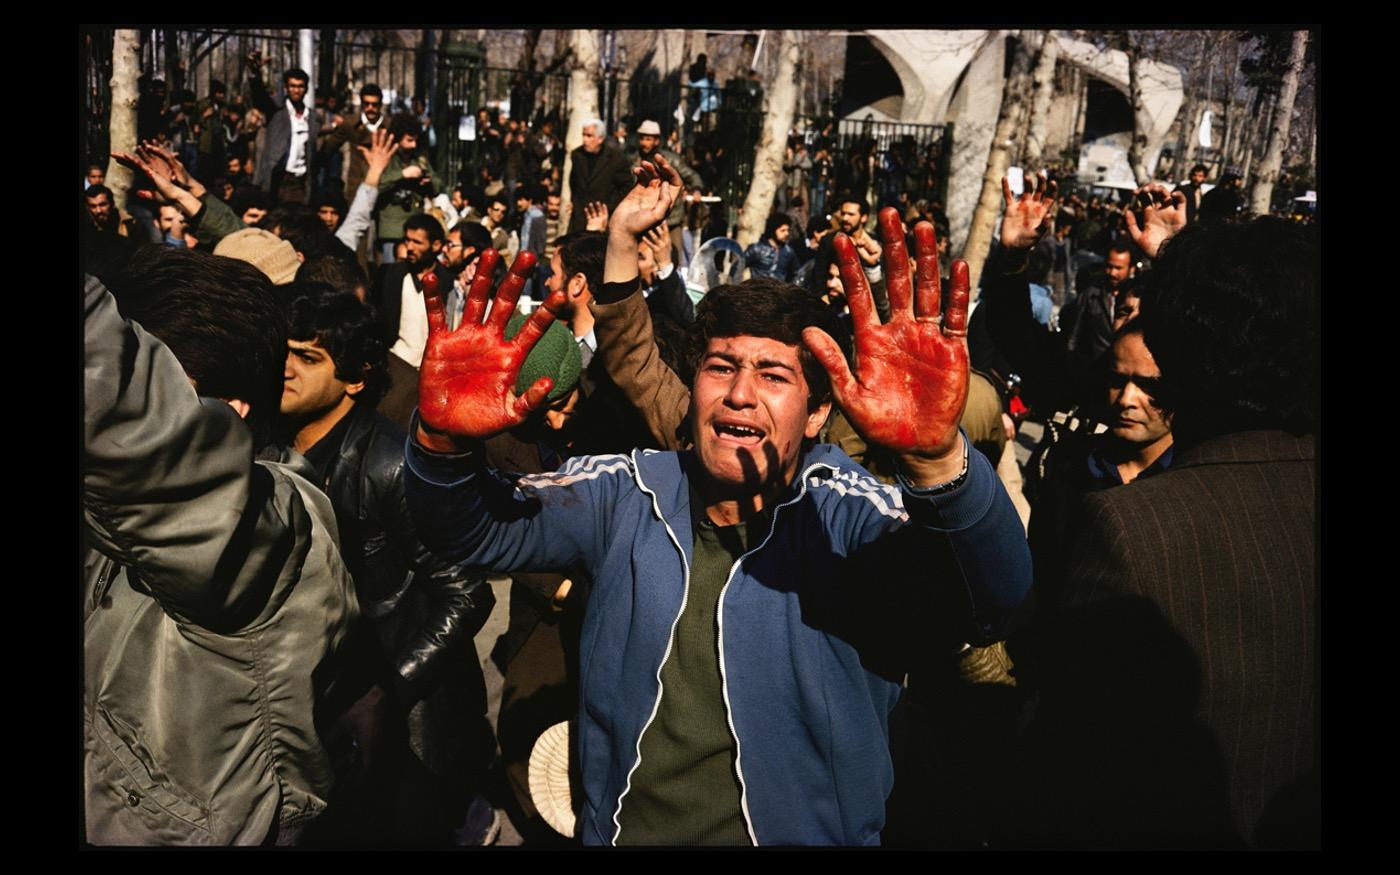 The day before Aystollah Khomeini's return to Iran after decades of exile,  members of the Army shot and killed a demonstrator, and his friends showed off his blood on their hands, showing that another martyr had fallen  1979 : Looking Back: 60 Years of Photographs : David Burnett | Photographer